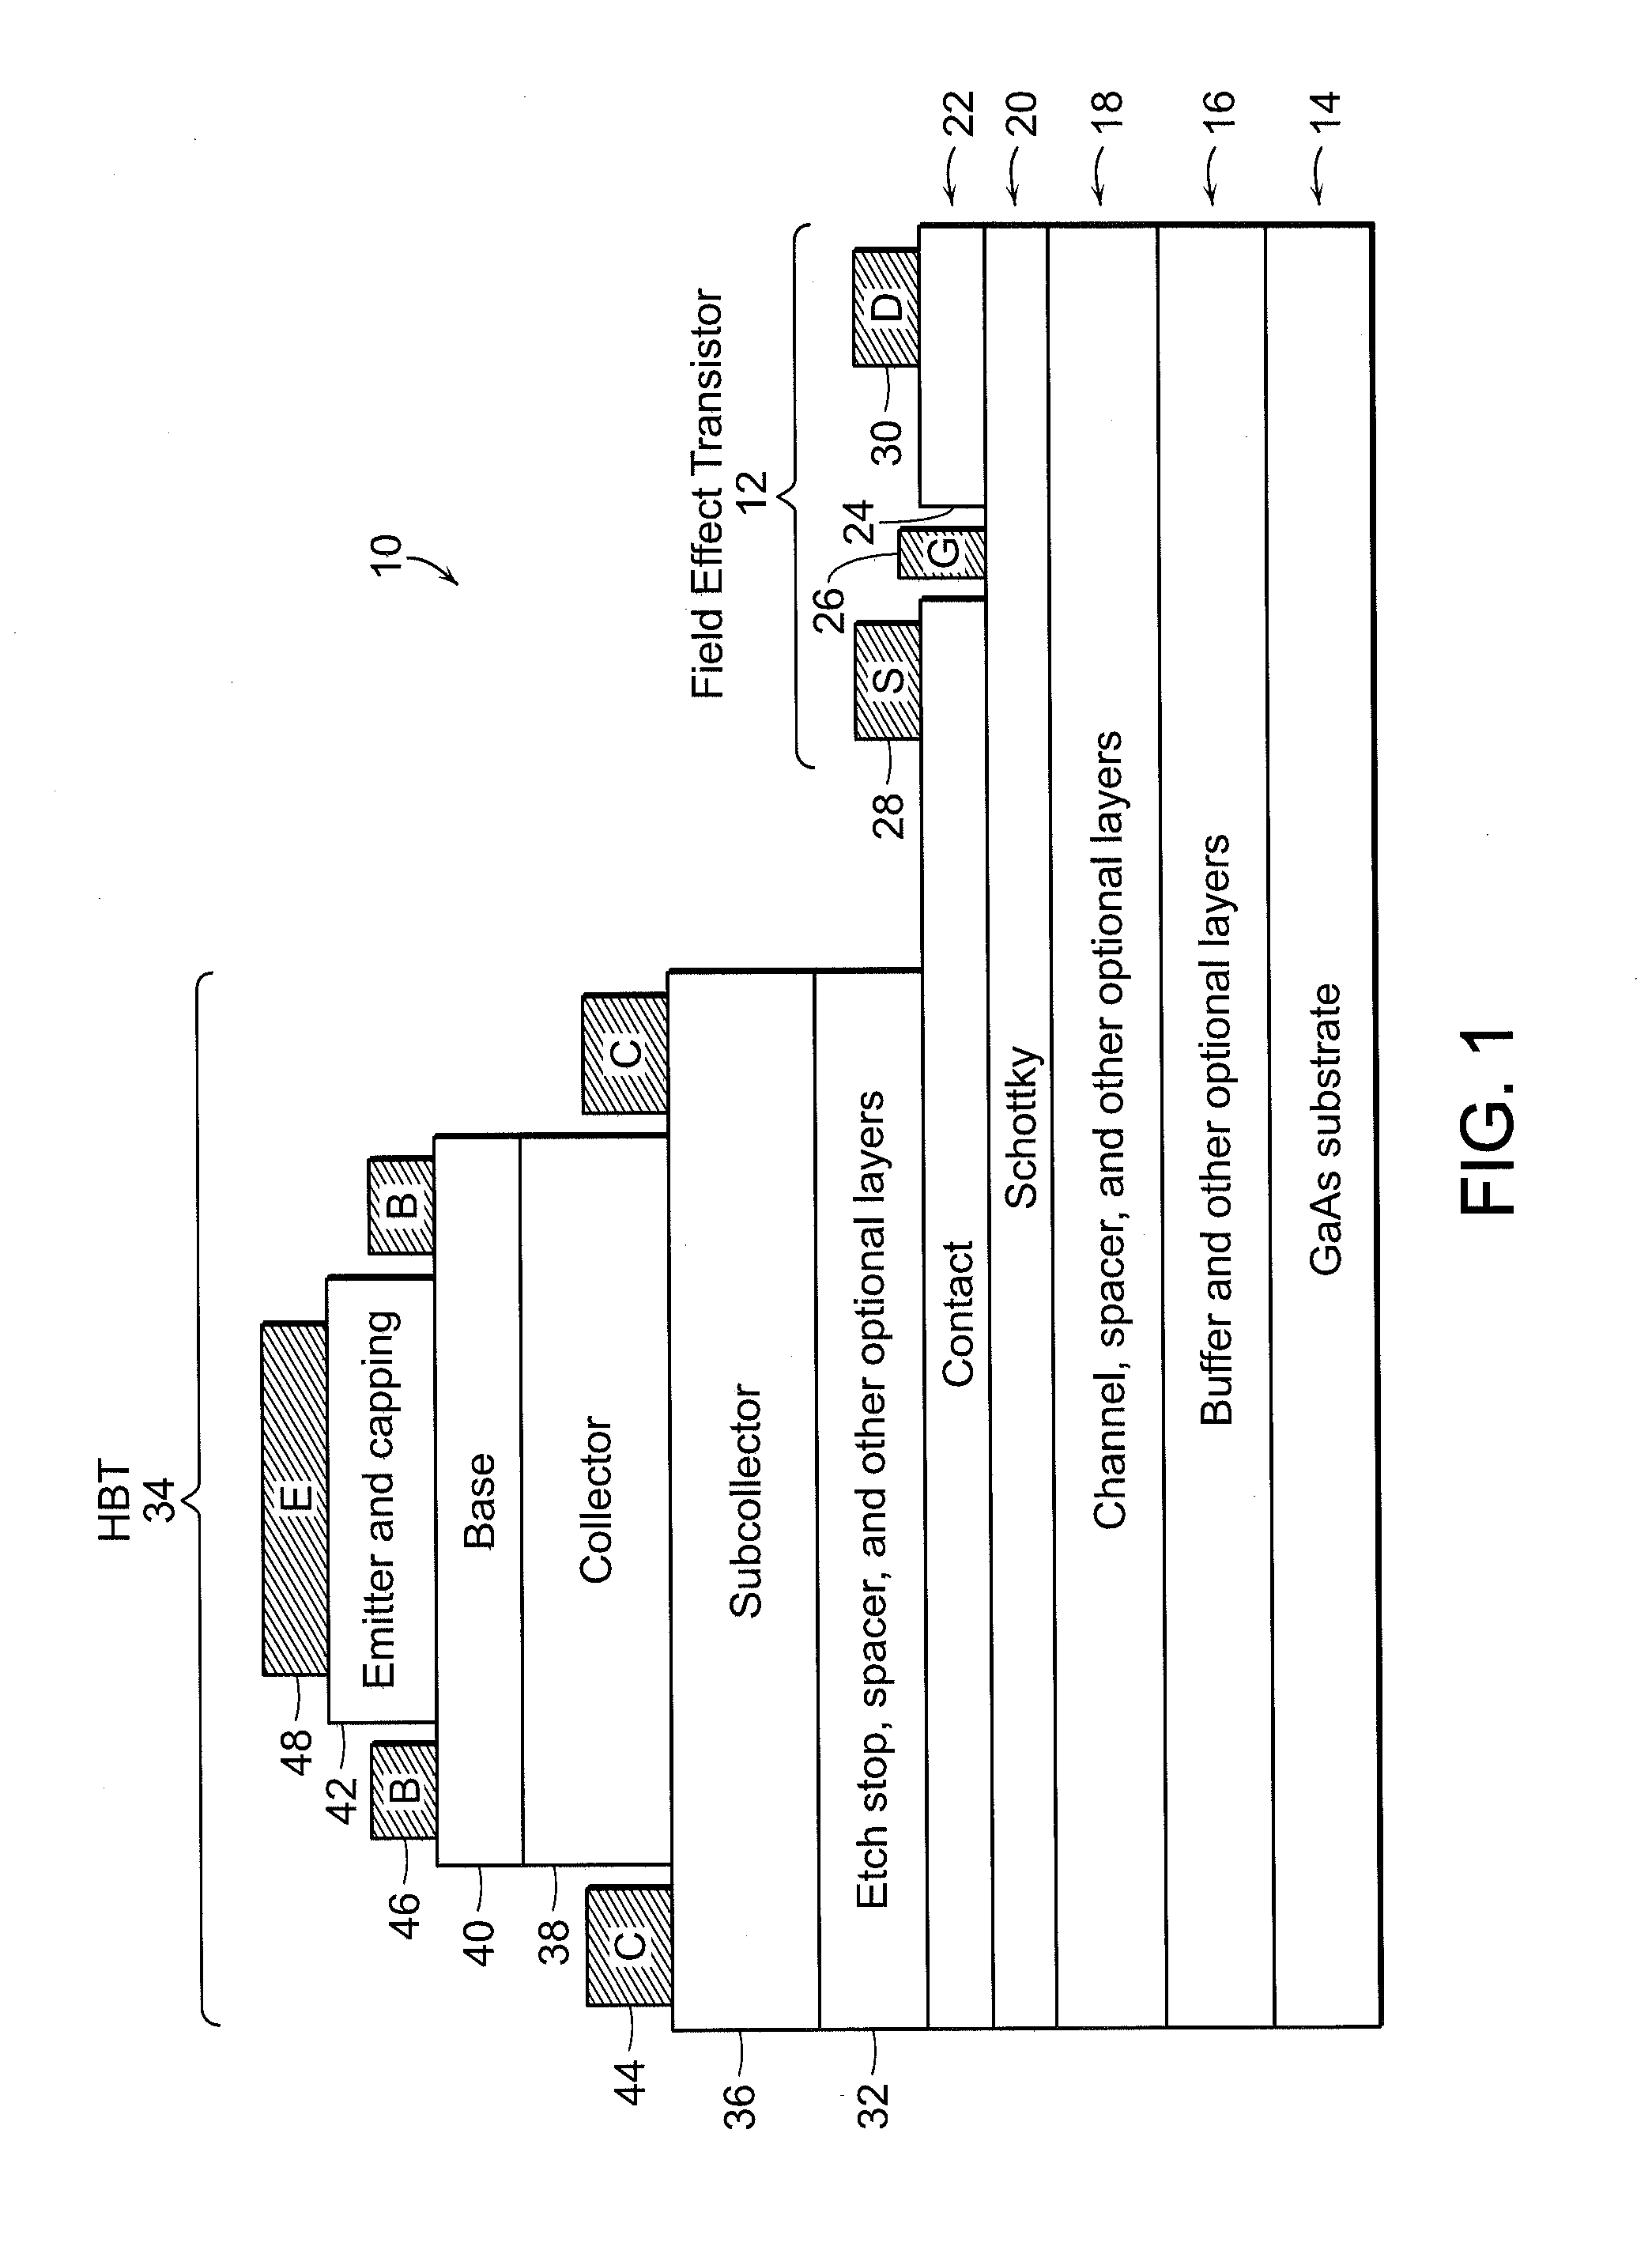 Bipolar high electron mobility transistor and methods of forming same